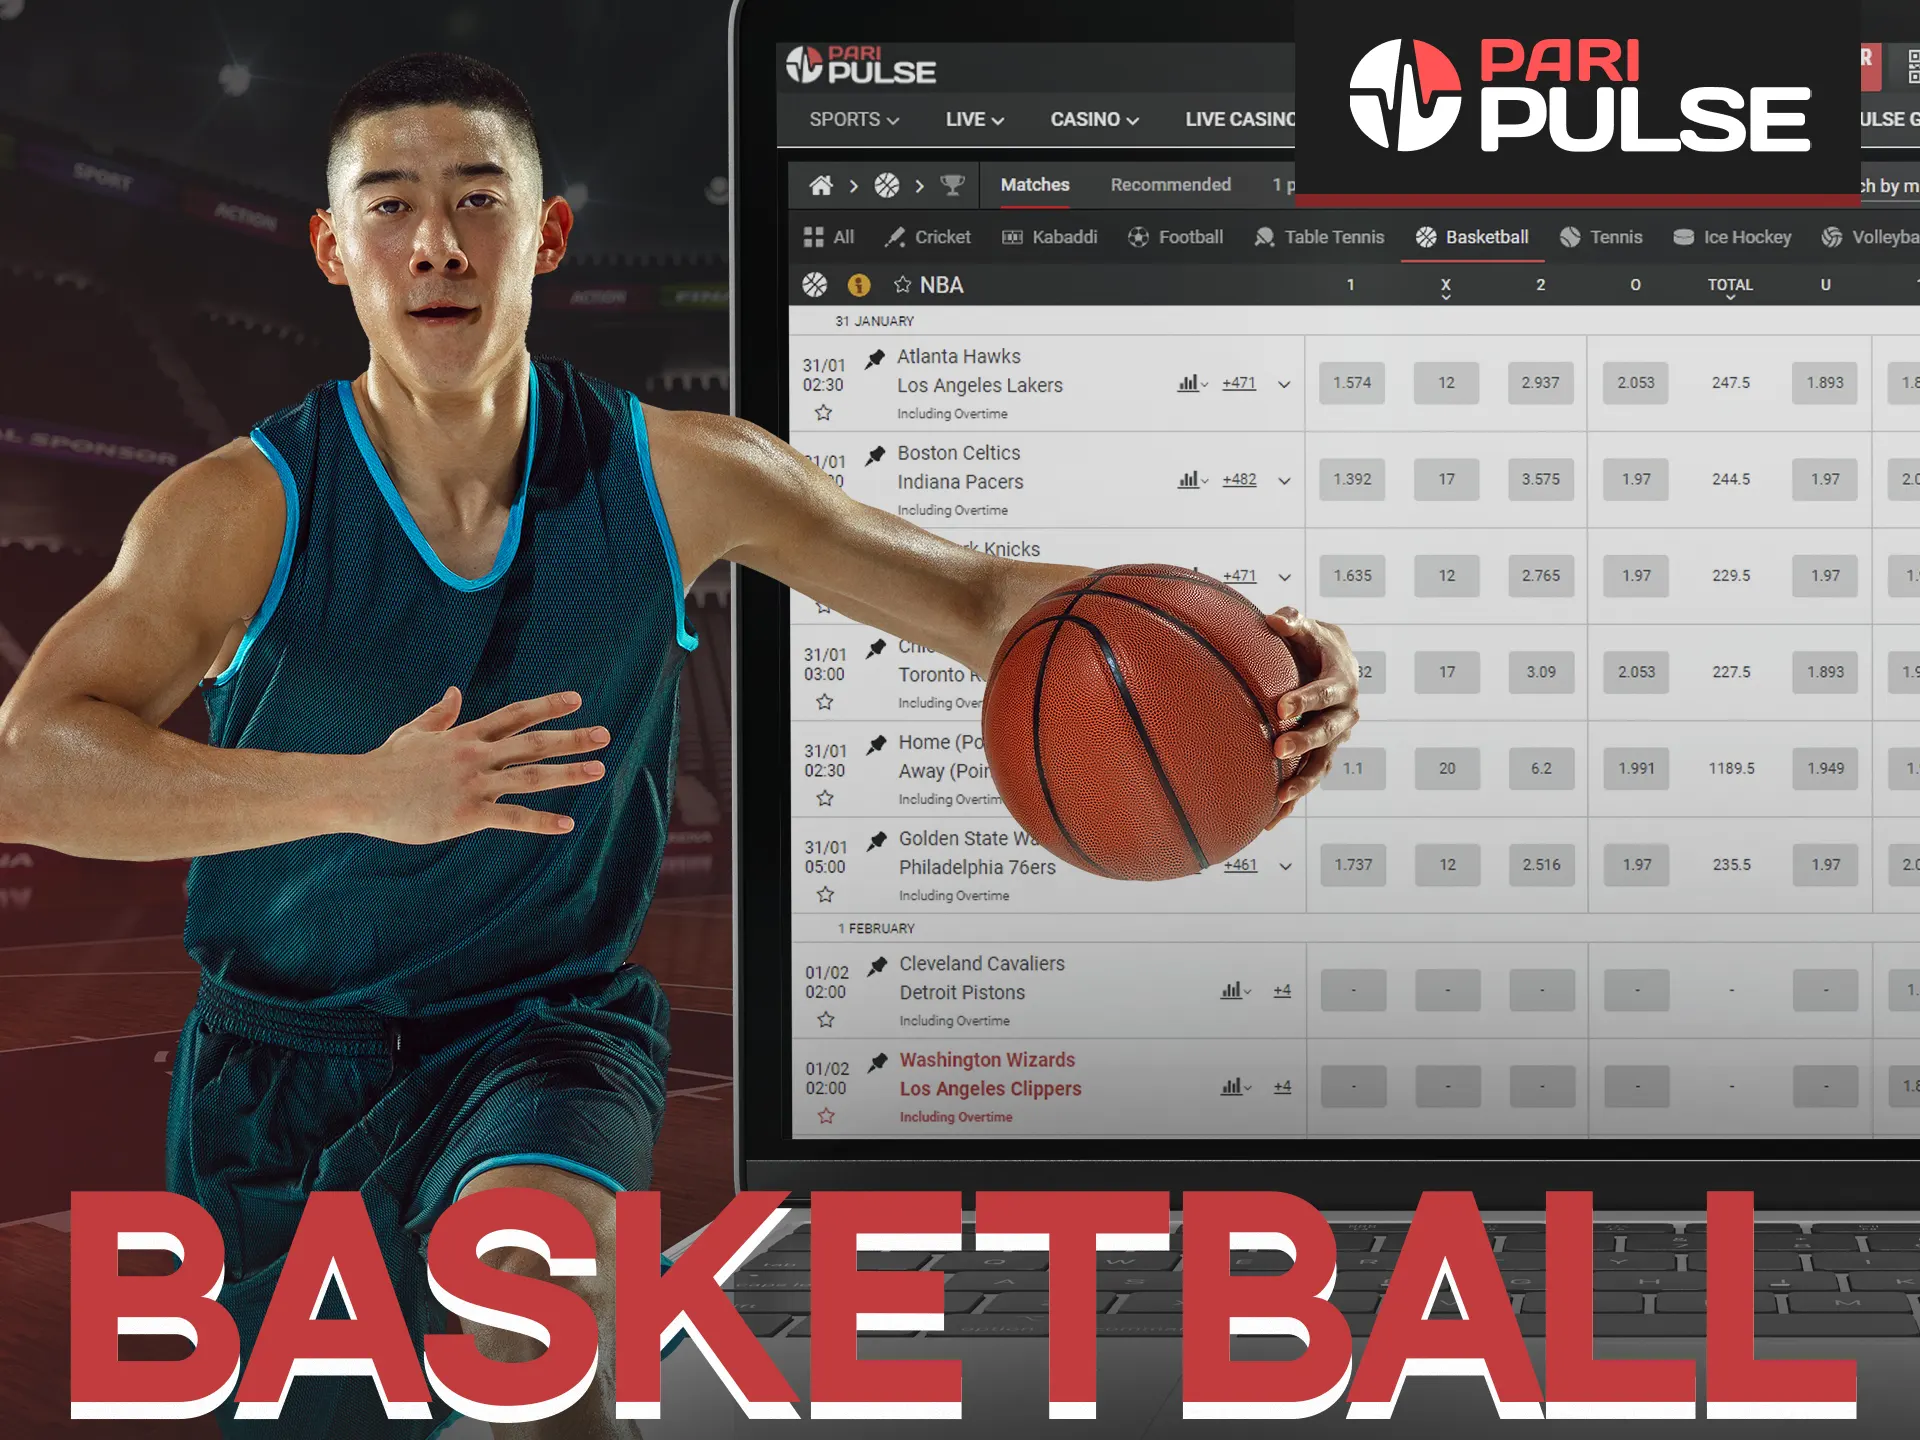 Place bets on basketball events at PariPulse.